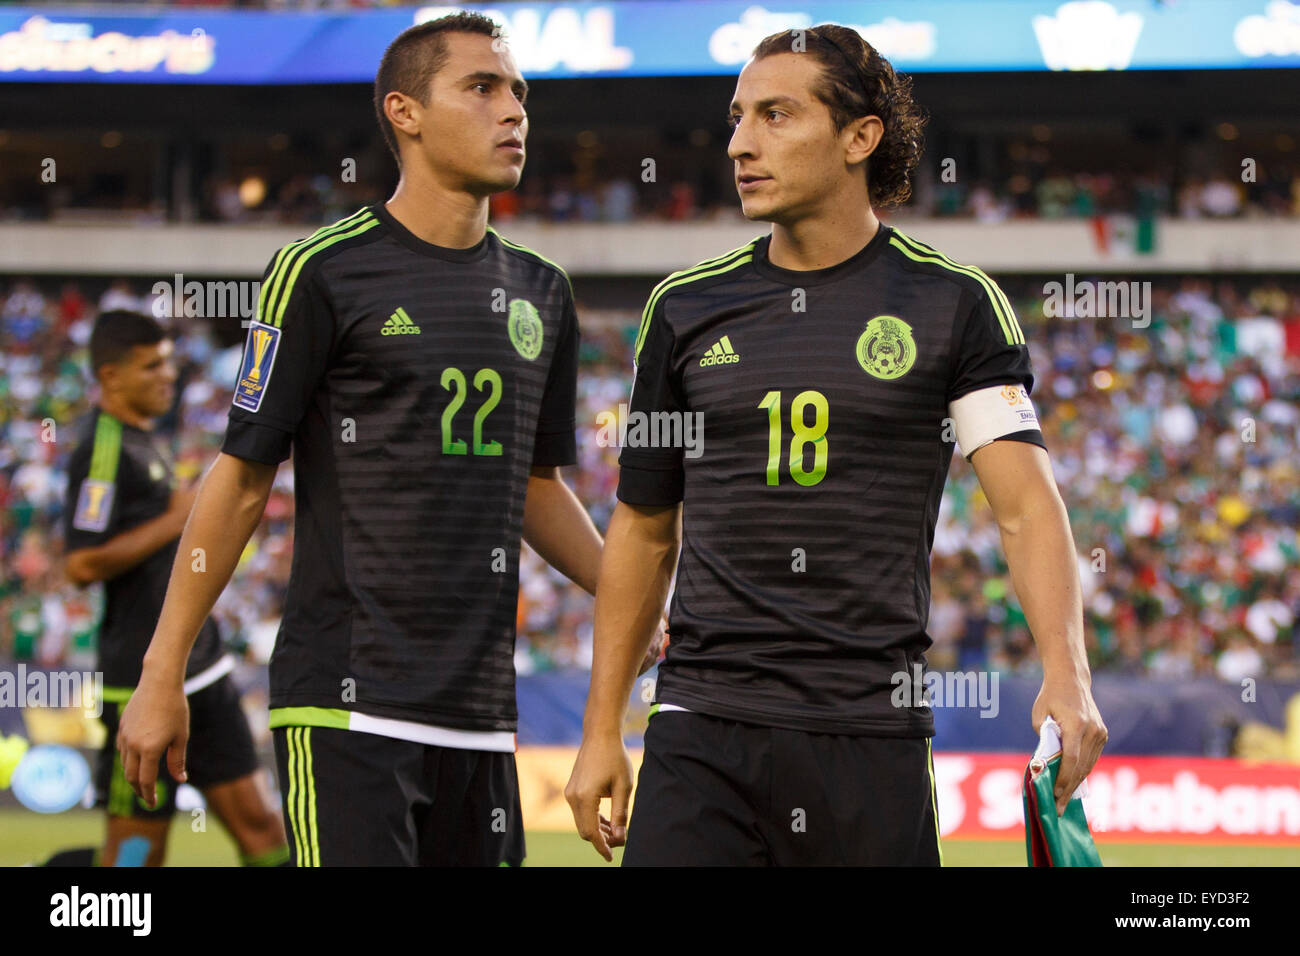 July 26, 2015: Mexico midfielder Andres Guardado (18) looks on wtith defender Paul Aguilar (22) during the CONCACAF Gold Cup 2015 Final match between Jamaica and Mexico at Lincoln Financial Field in Philadelphia, Pennsylvania. Mexico won 3-1. Christopher Szagola/CSM Stock Photo